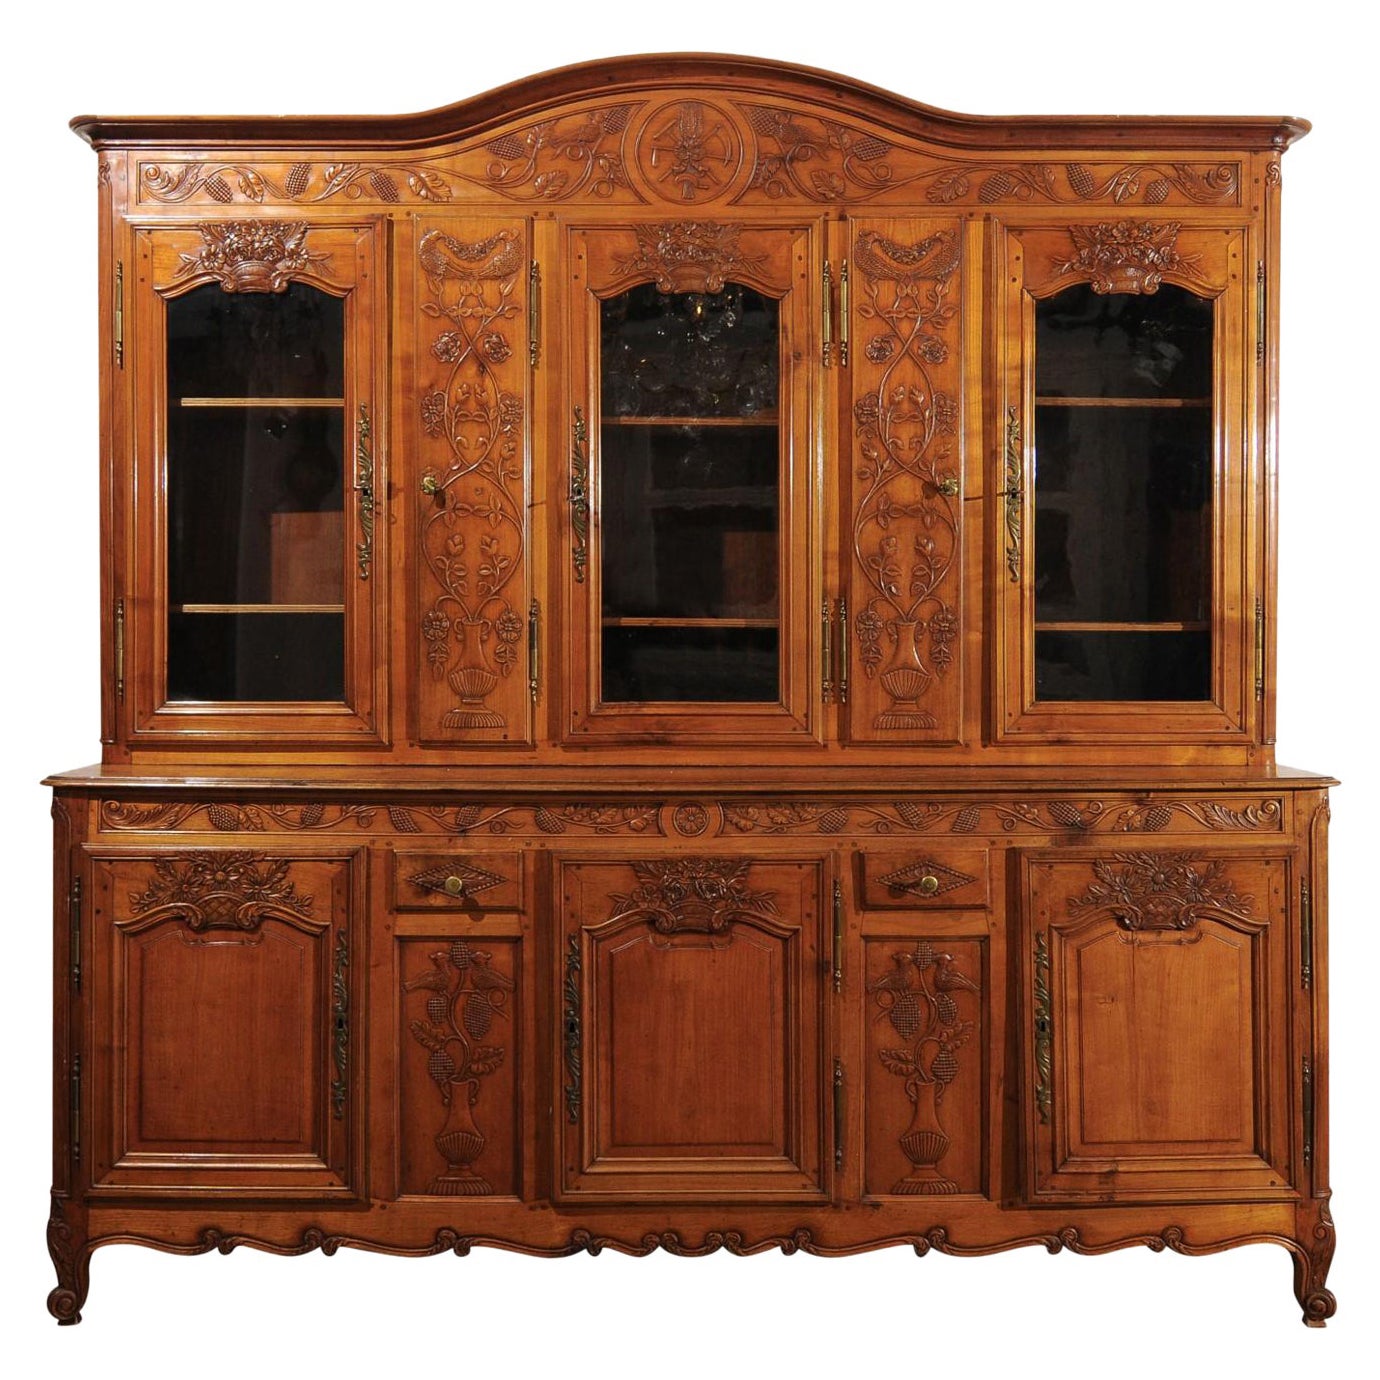 French 1820s Carved Walnut Vitrine with Glass Doors, Hidden Panels and Drawers For Sale